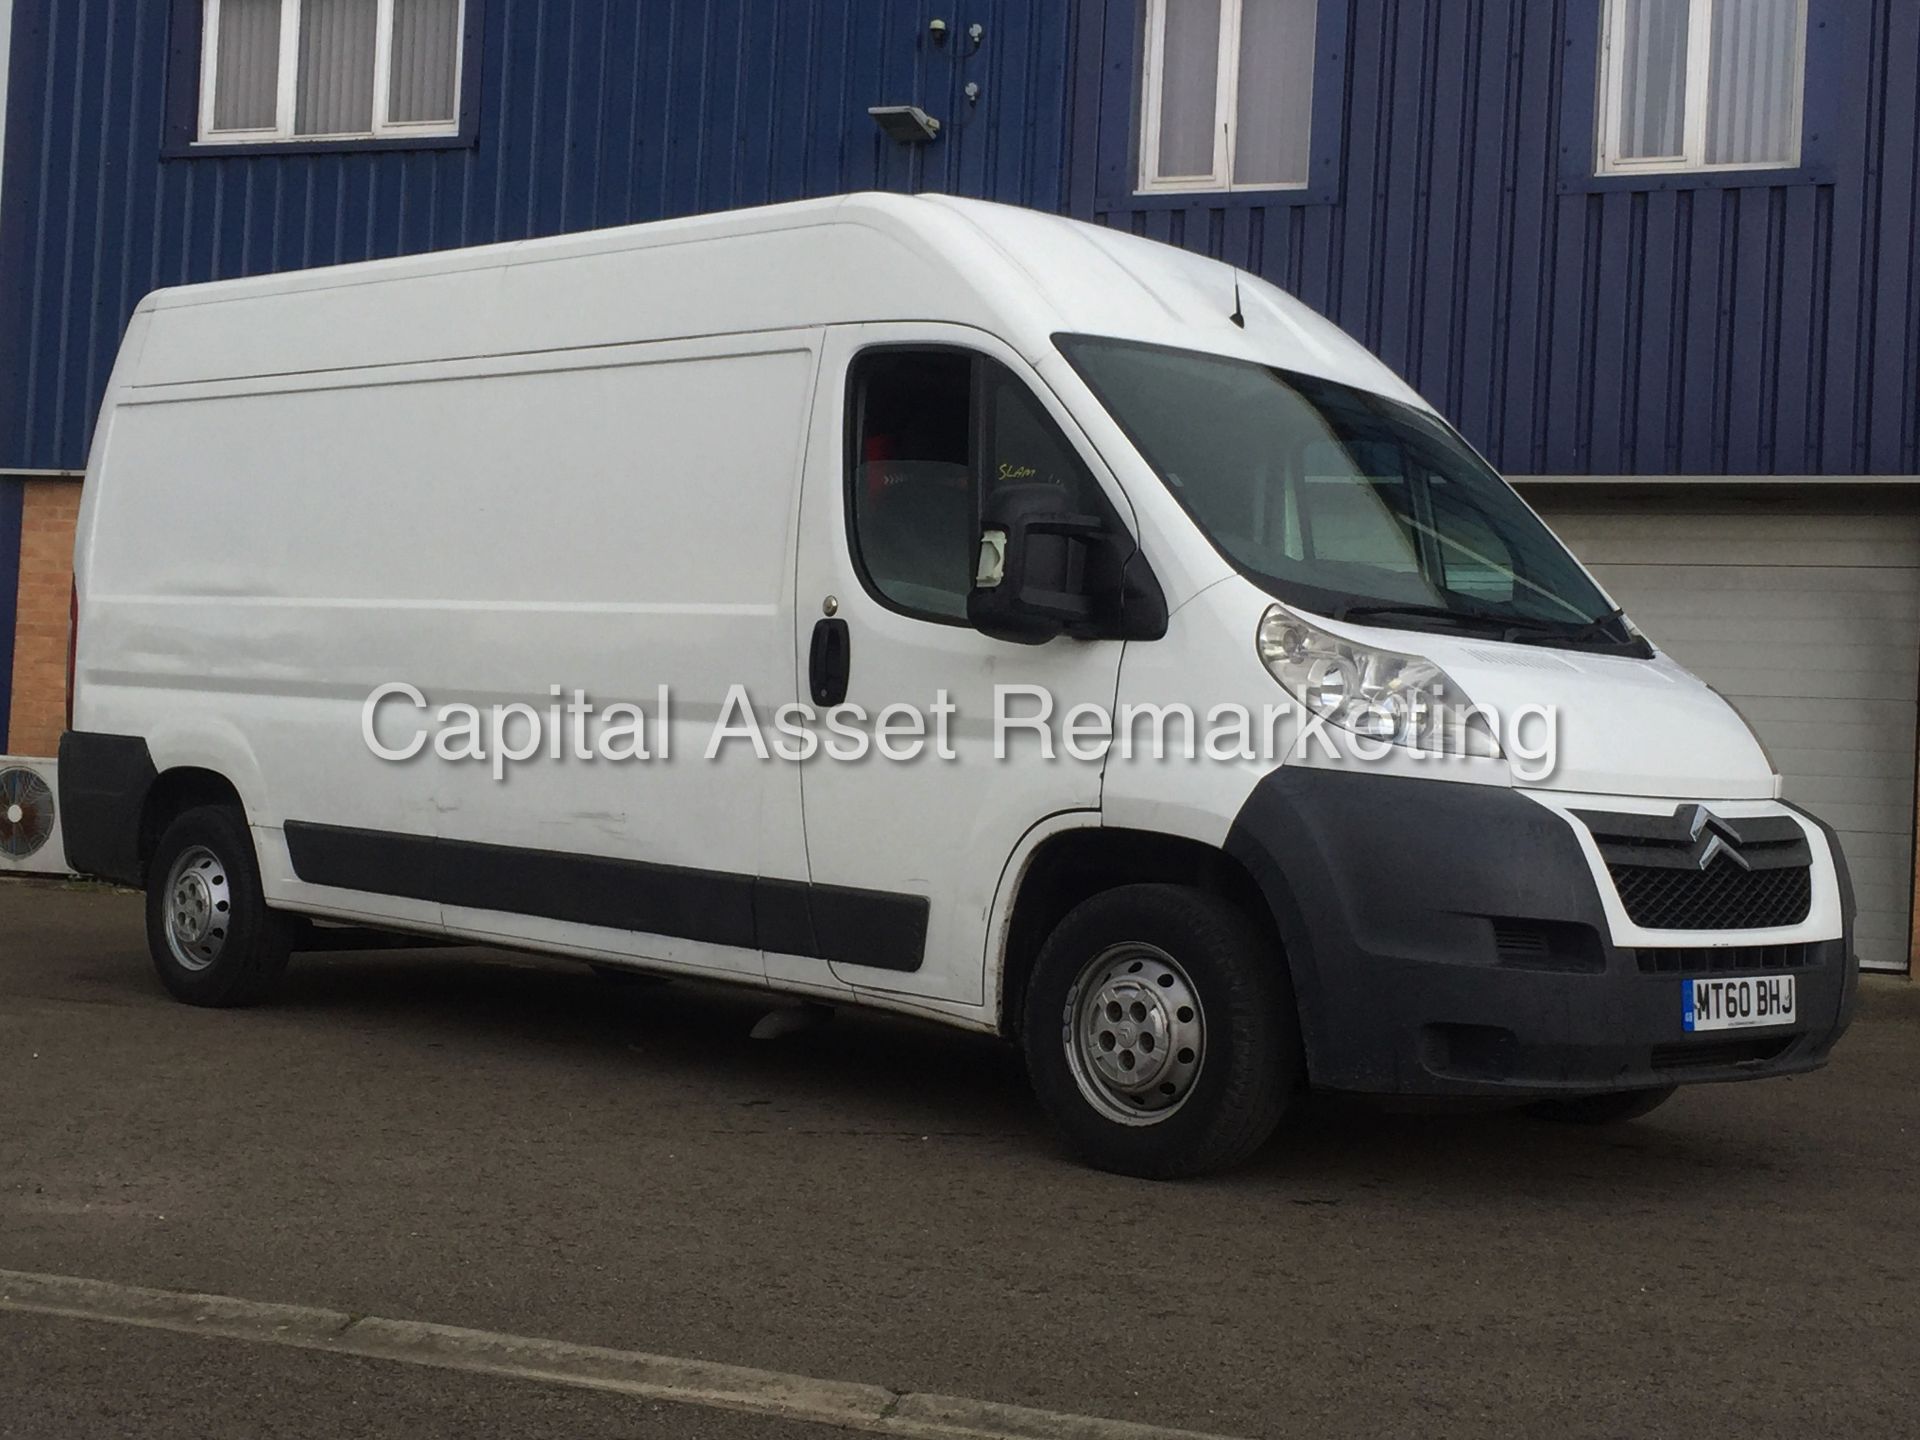 CITROEN RELAY 35 LWB HI-ROOF (2011 MODEL) 2.2 HDI - 120 PS - 6 SPEED (ELECTRIC PACK)